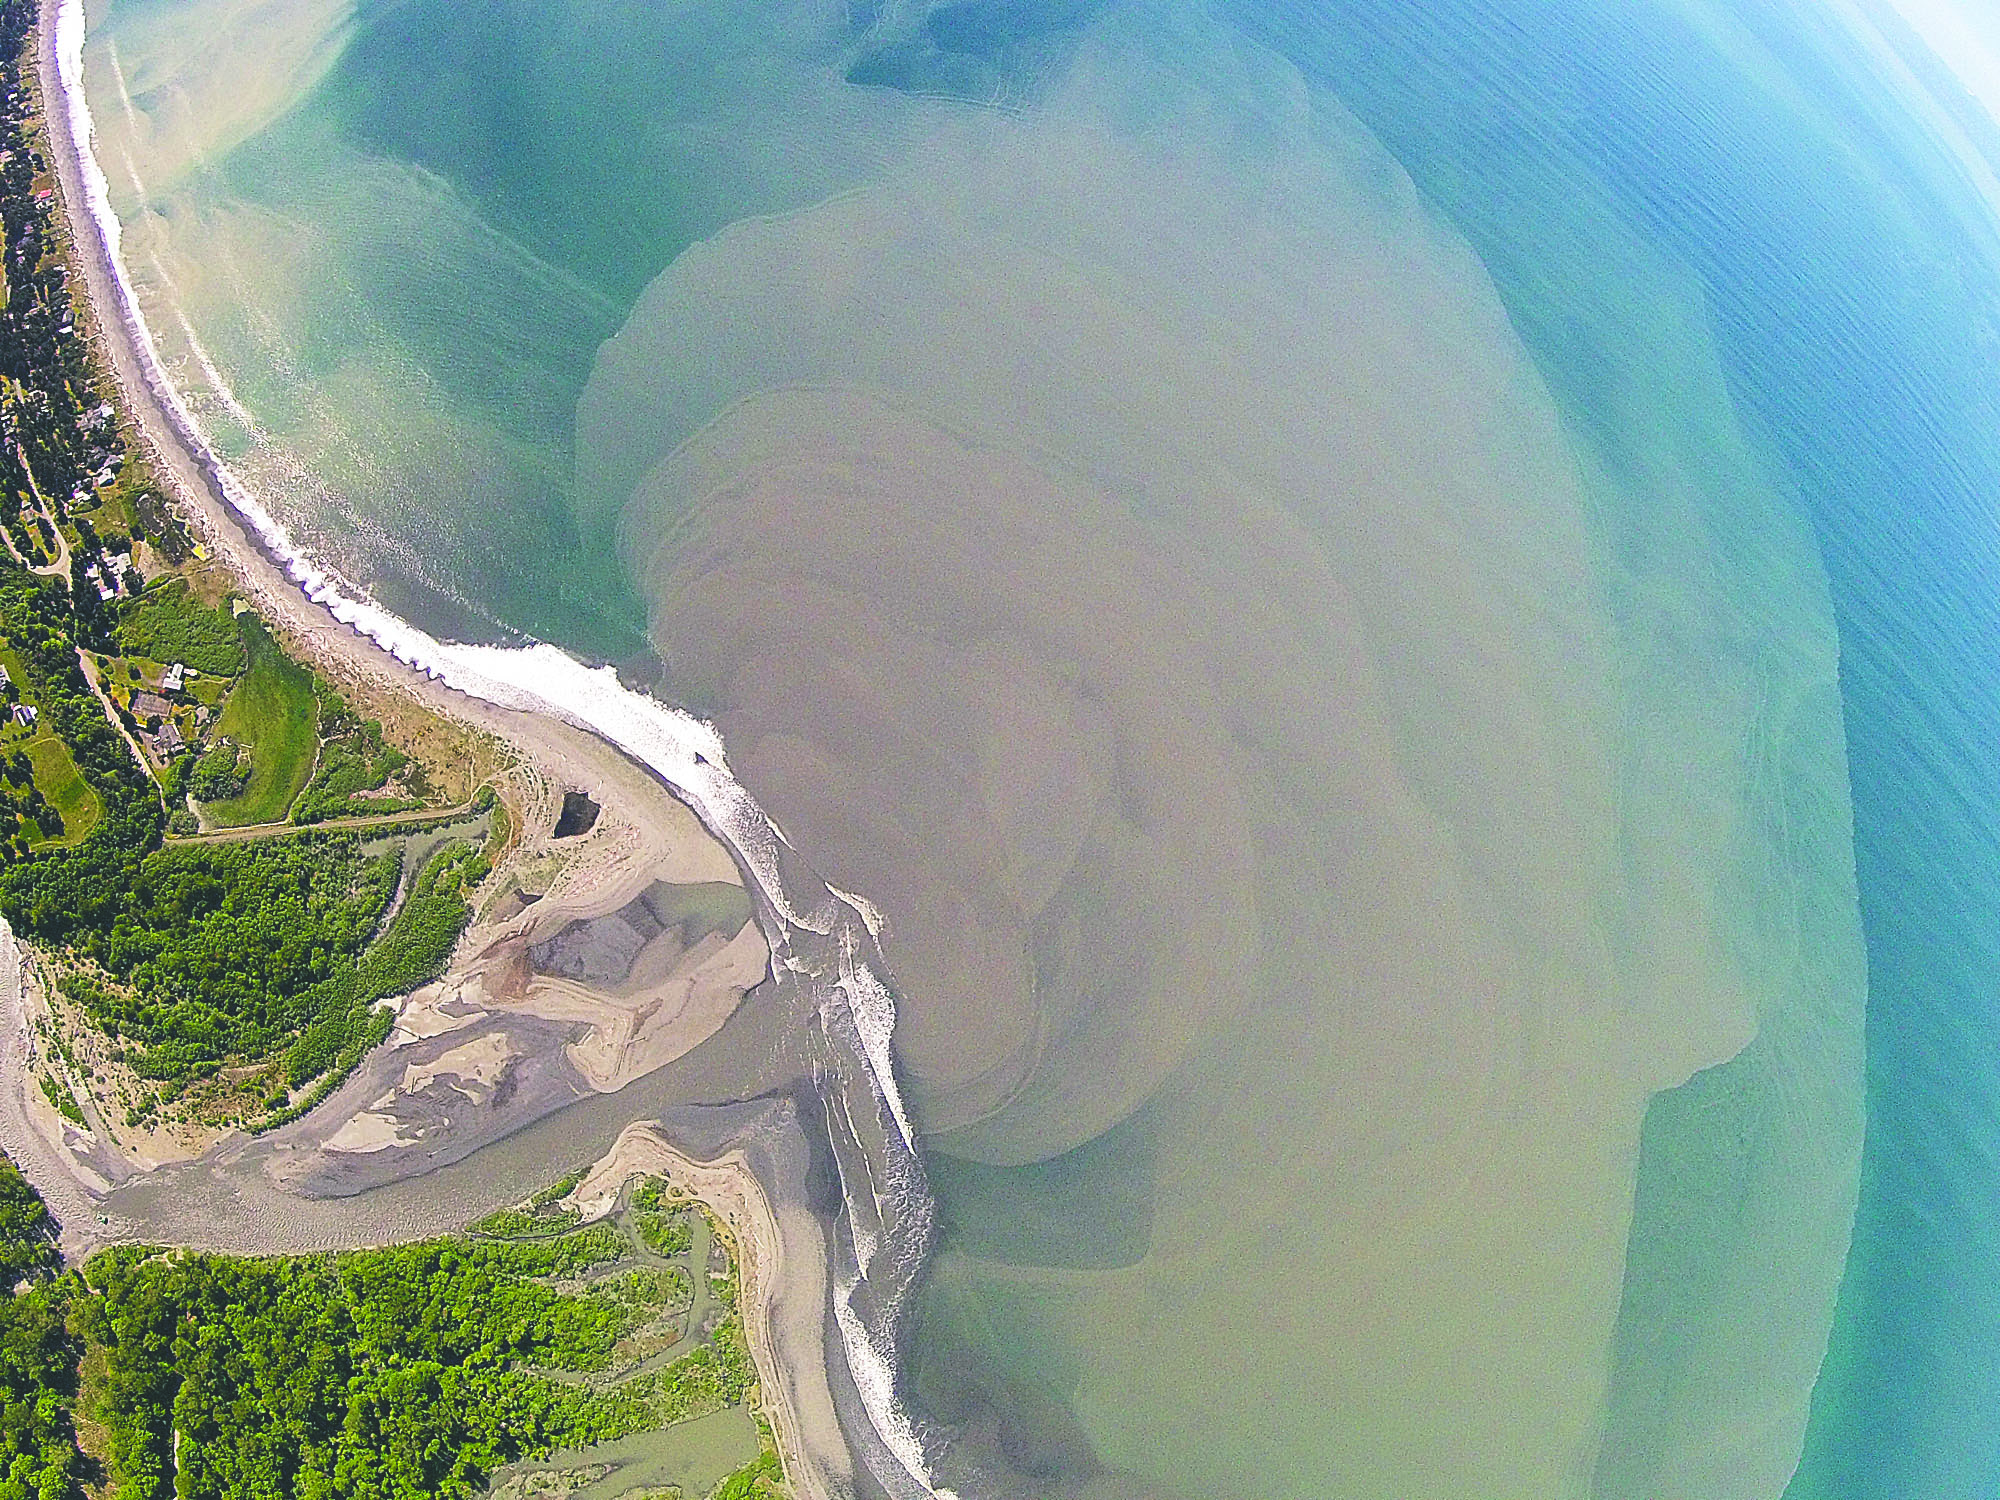 A plume of sediment can be seen widening out from the mouth of the Elwha River on Sunday. Tom Roorda